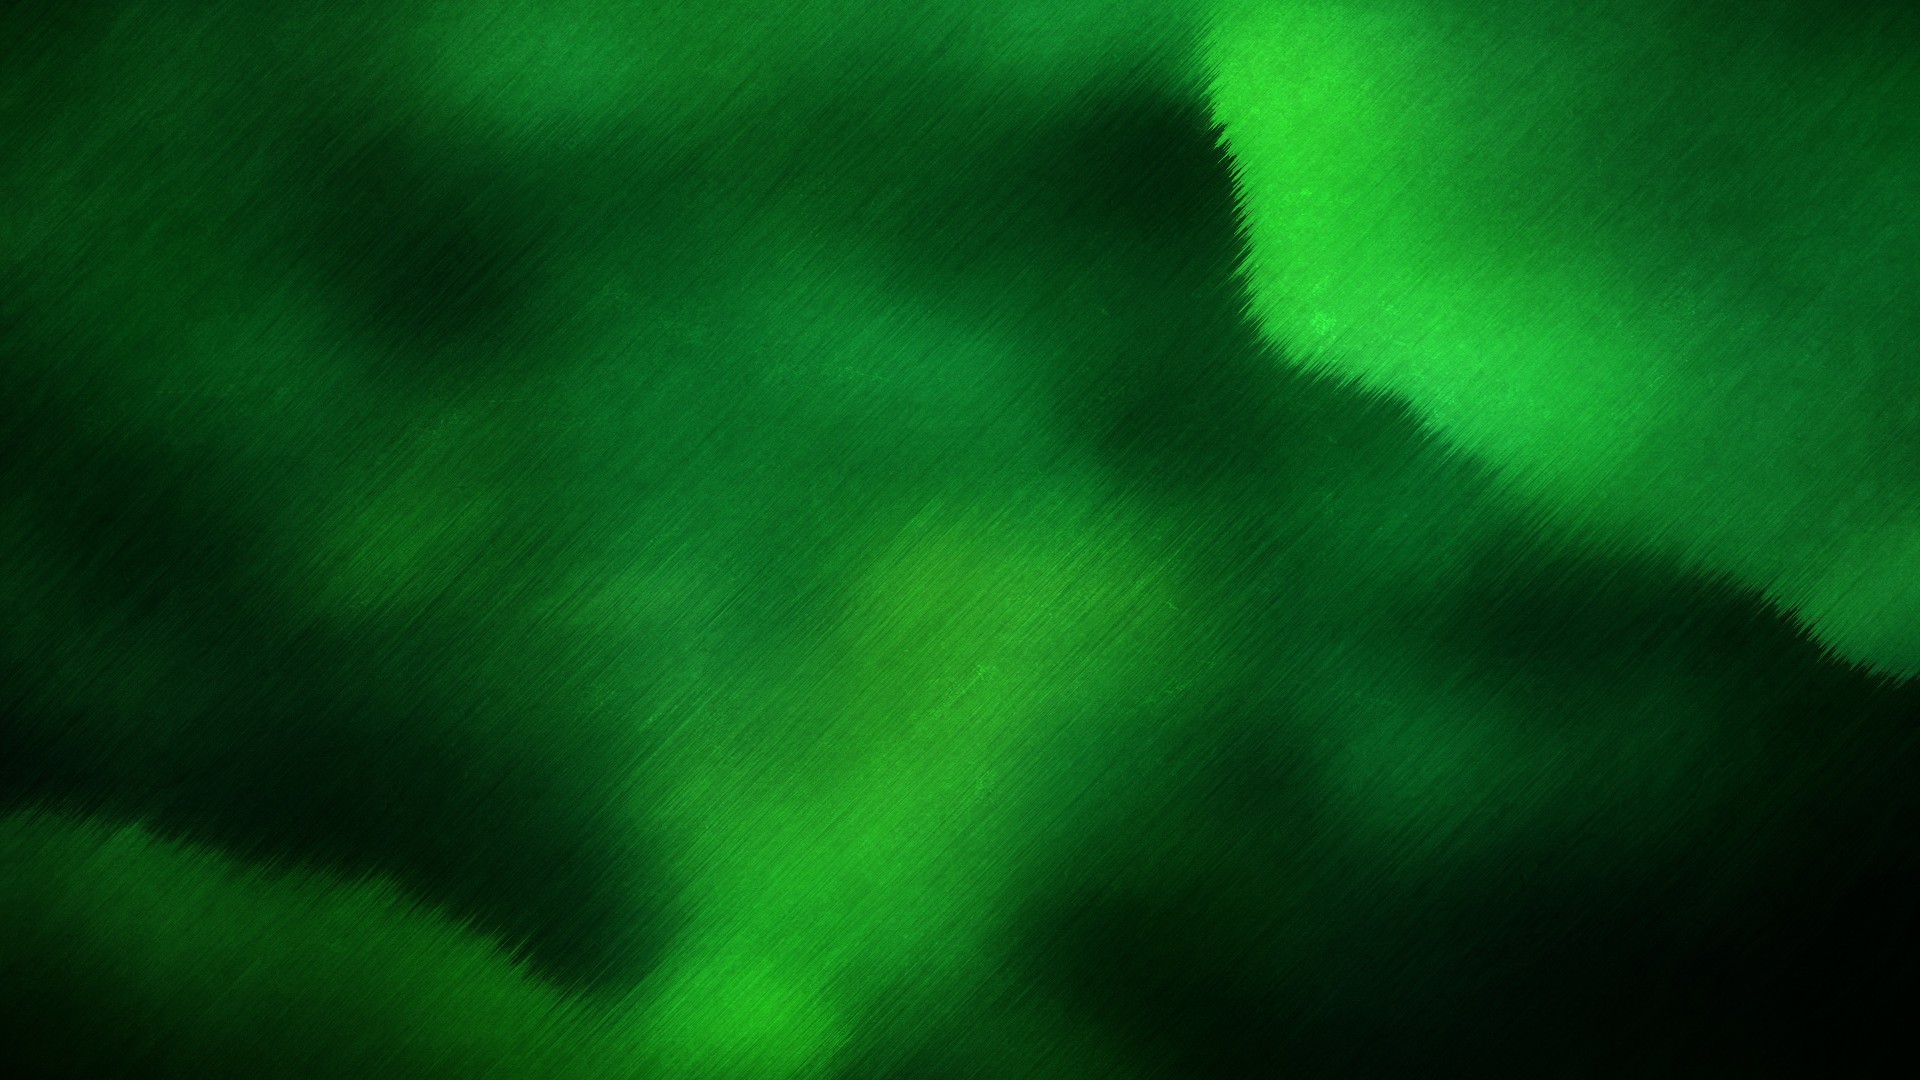 1920x1080  Green with black background wallpapers and images - wallpapers .